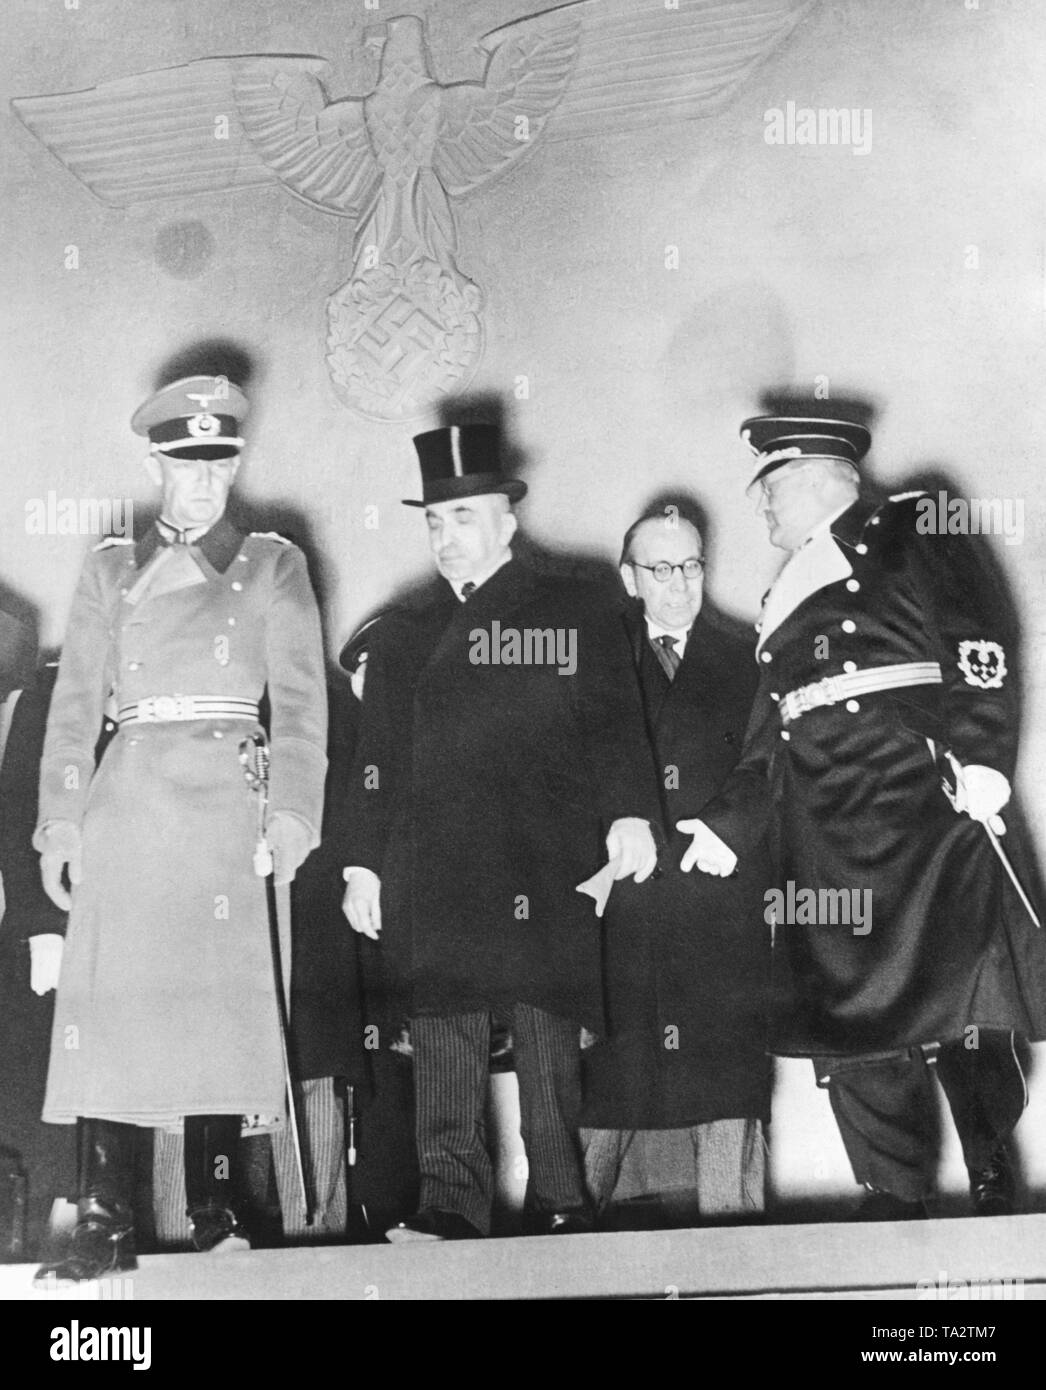 Town Major of Berlin Seifert, Czech President Emil Hacha, Czech Foreign Minister Frantisek Chvalkovsky and Secretary of State Otto Meissner meeting in the New Reich Chancellery in Berlin. The politicians are discussing the transformation of the Czech Republic into the Protectorate of Bohemia and Moravia. Stock Photo